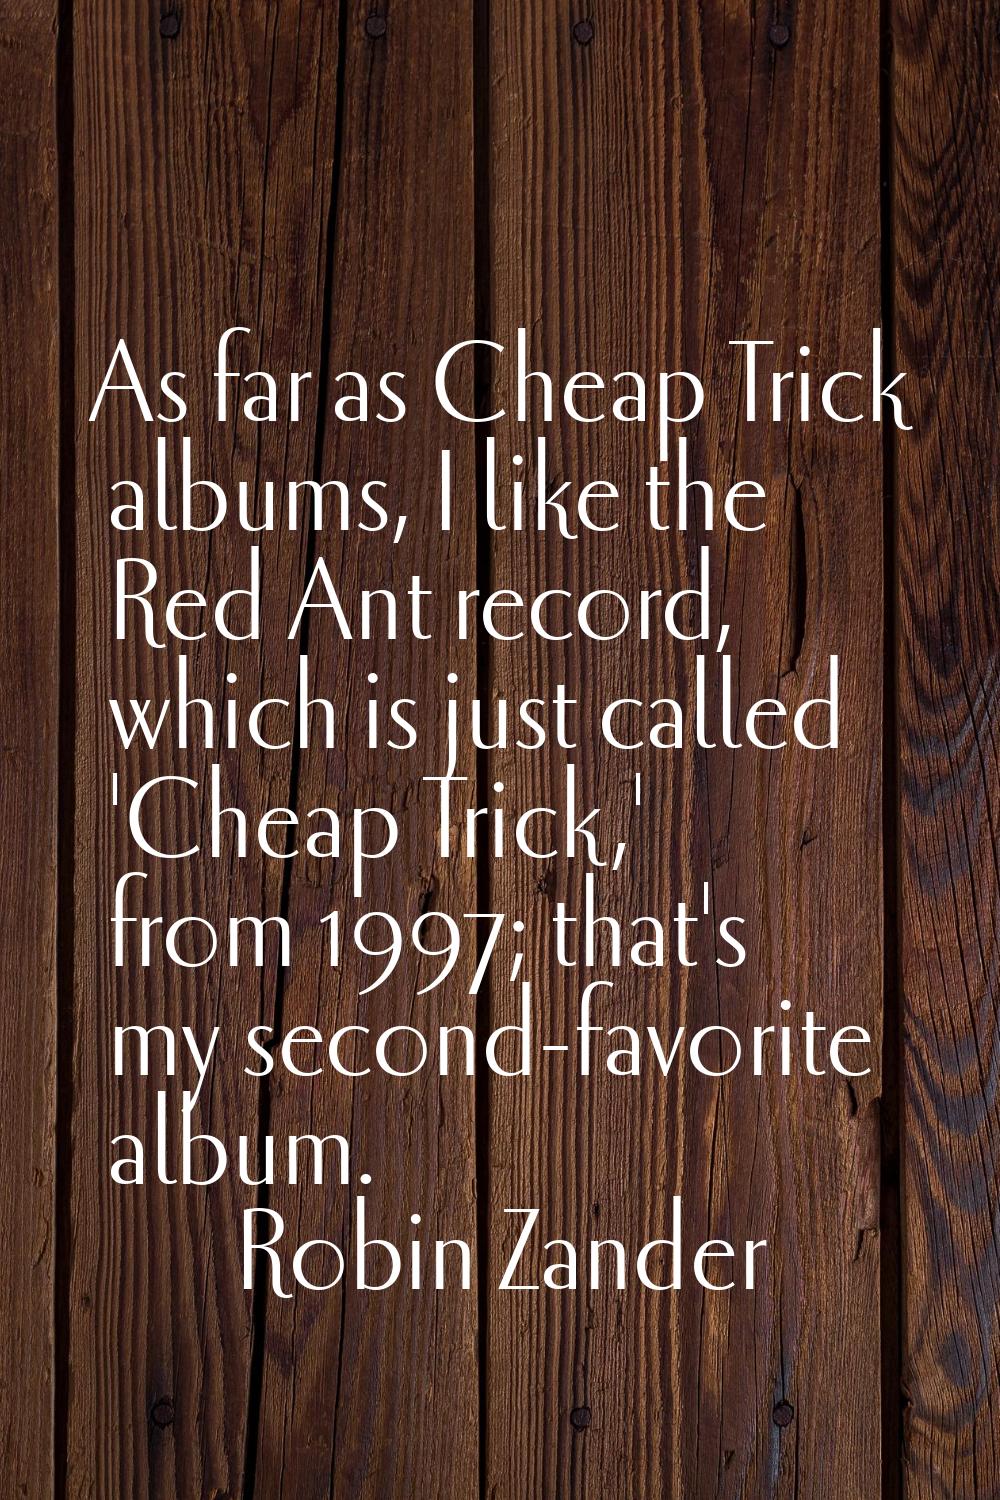 As far as Cheap Trick albums, I like the Red Ant record, which is just called 'Cheap Trick,' from 1